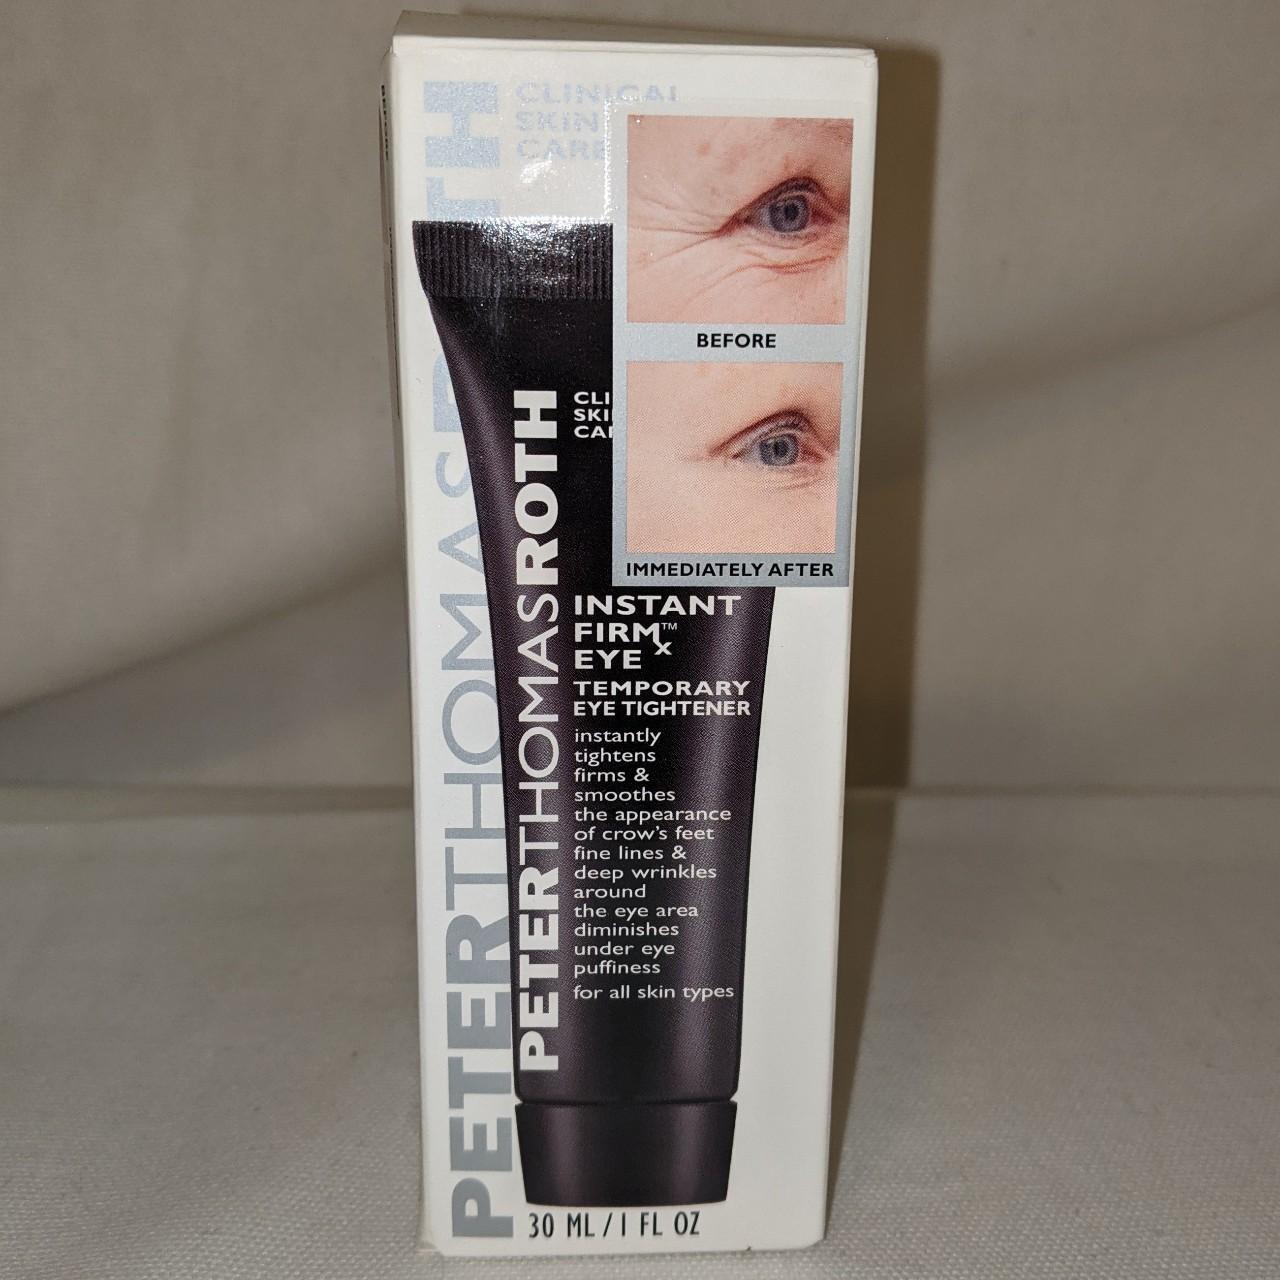 Product Image 1 - Instant firm eye, by Peter